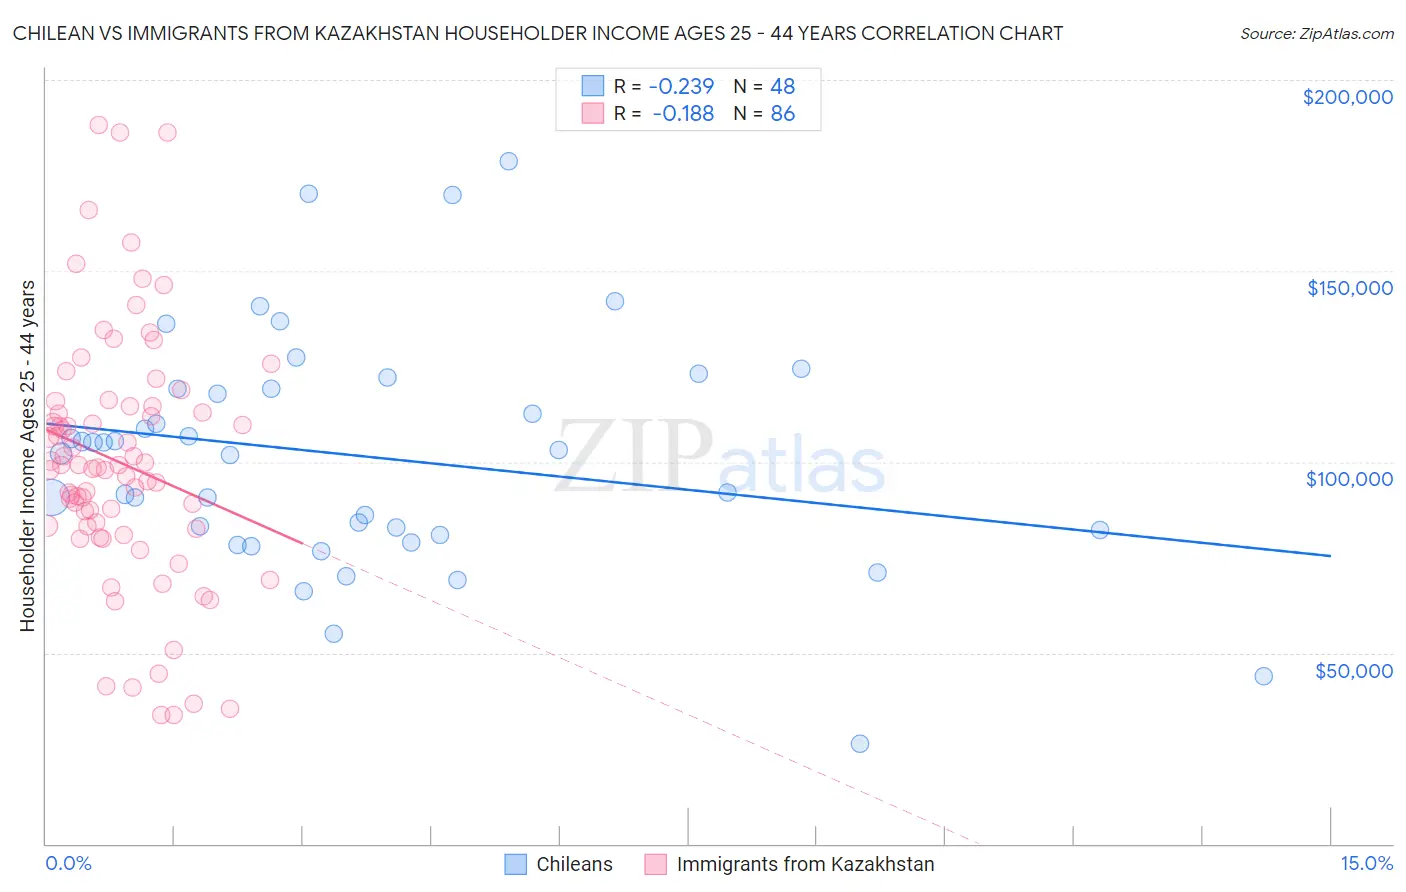 Chilean vs Immigrants from Kazakhstan Householder Income Ages 25 - 44 years